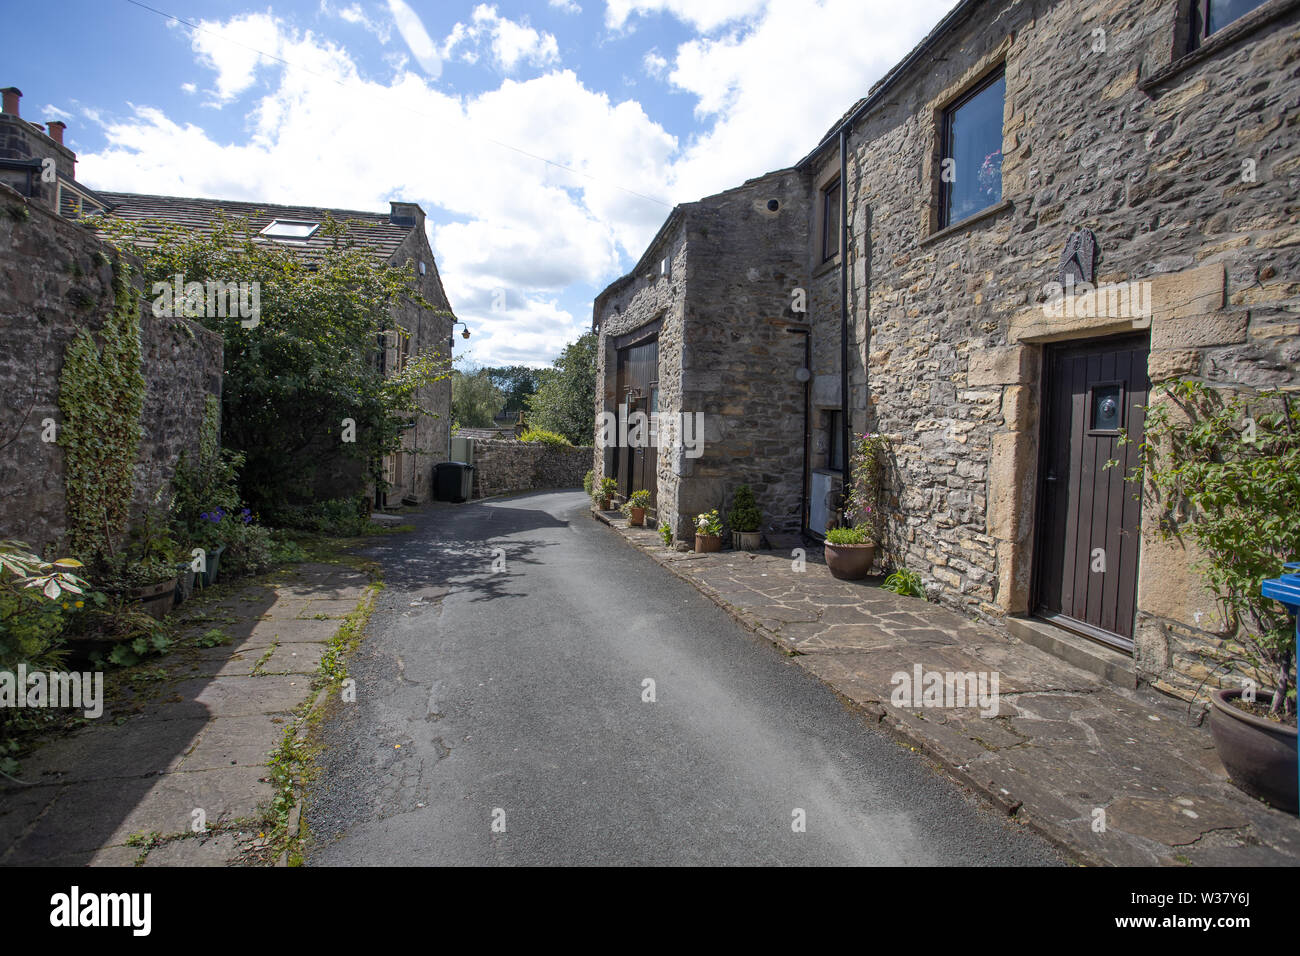 A row of stone cottages in a yorkshire dales village. Stock Photo